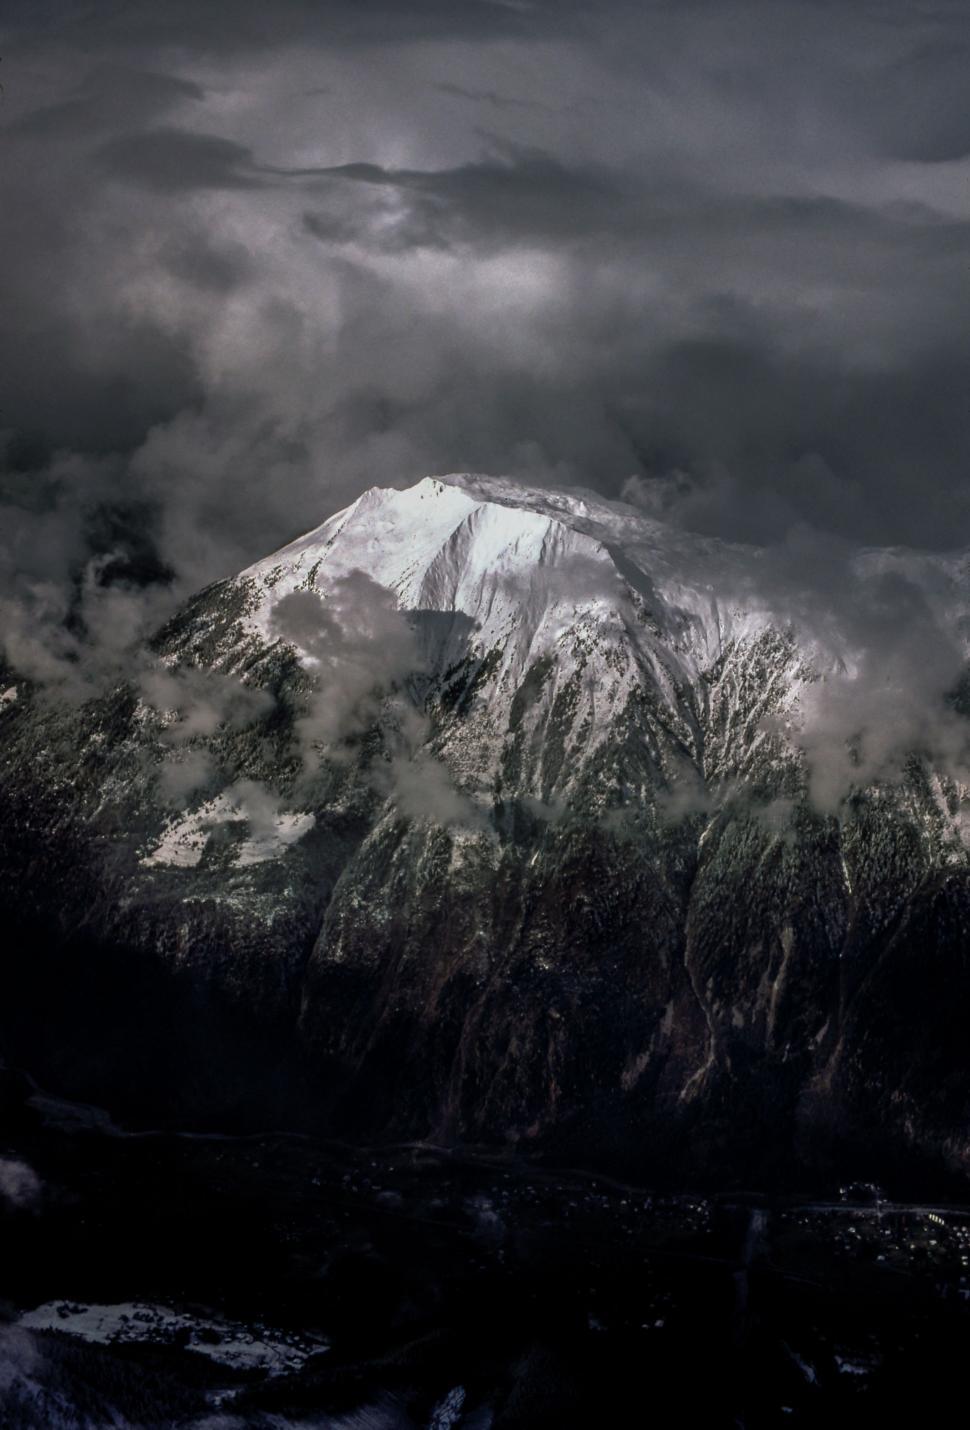 Free Image of Snow Mountains with Dark Clouds  